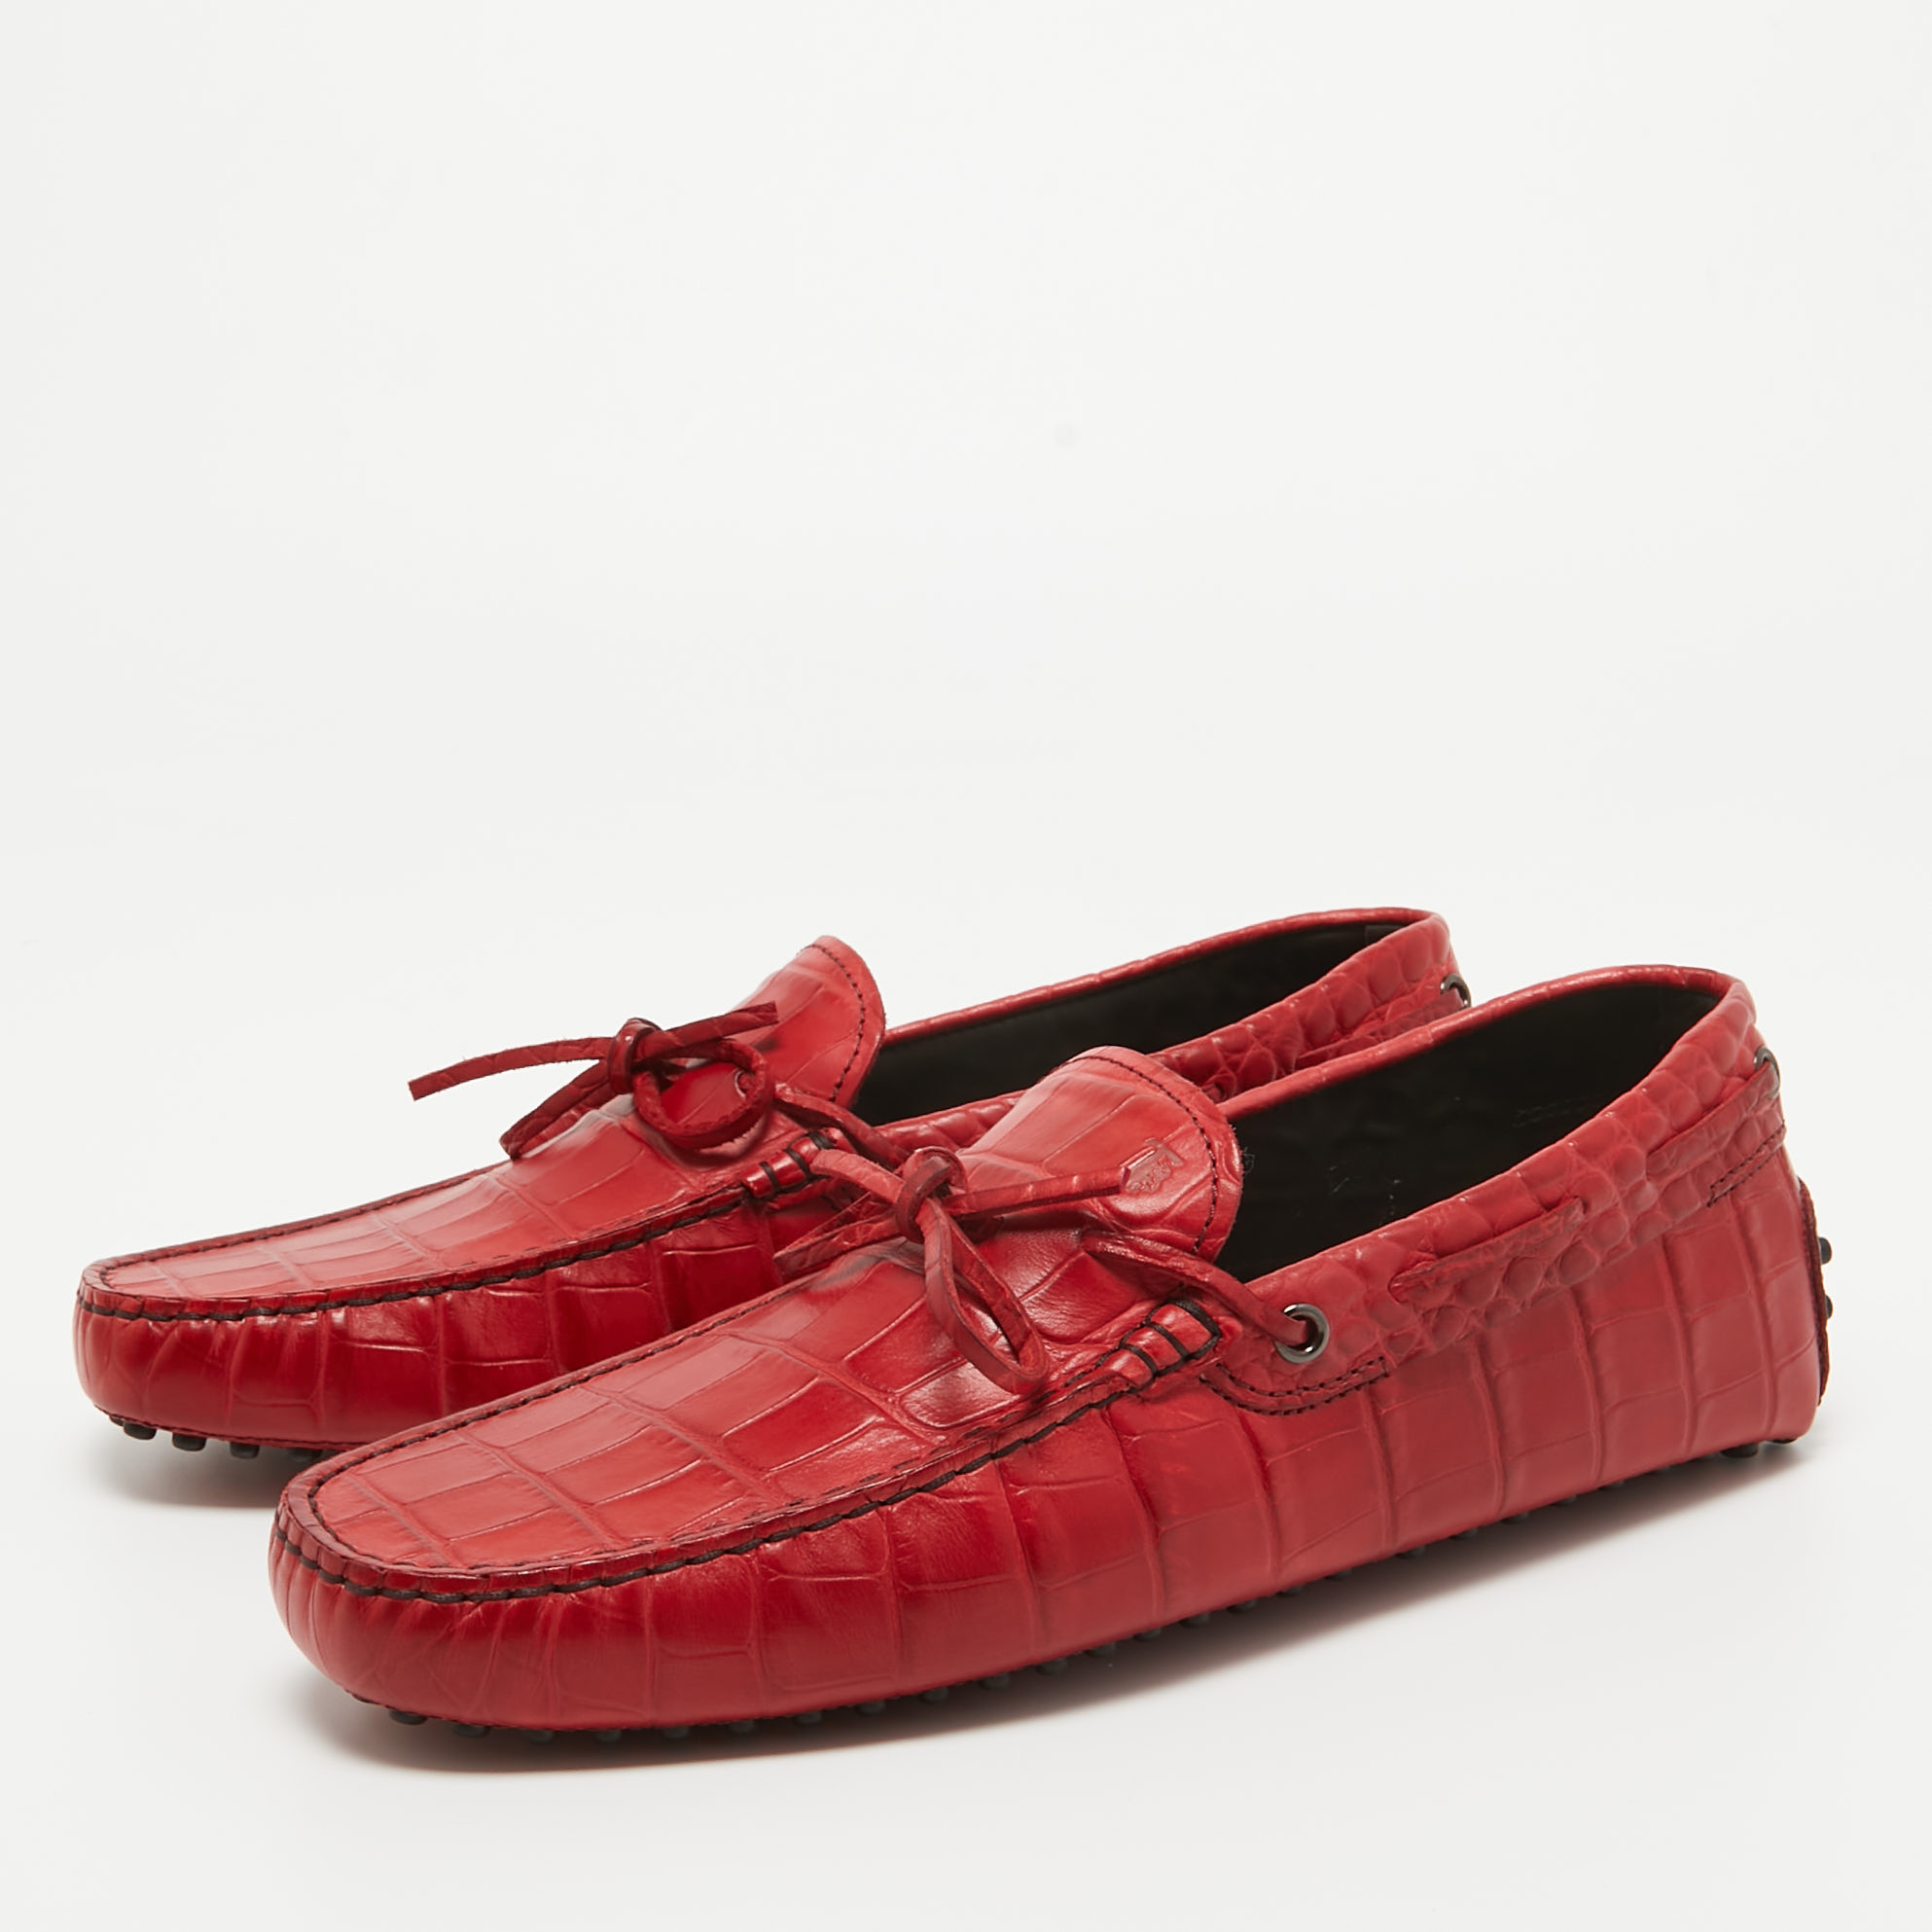 

Tod's Red Croc Embossed Leather Bow Slip On Loafers Size